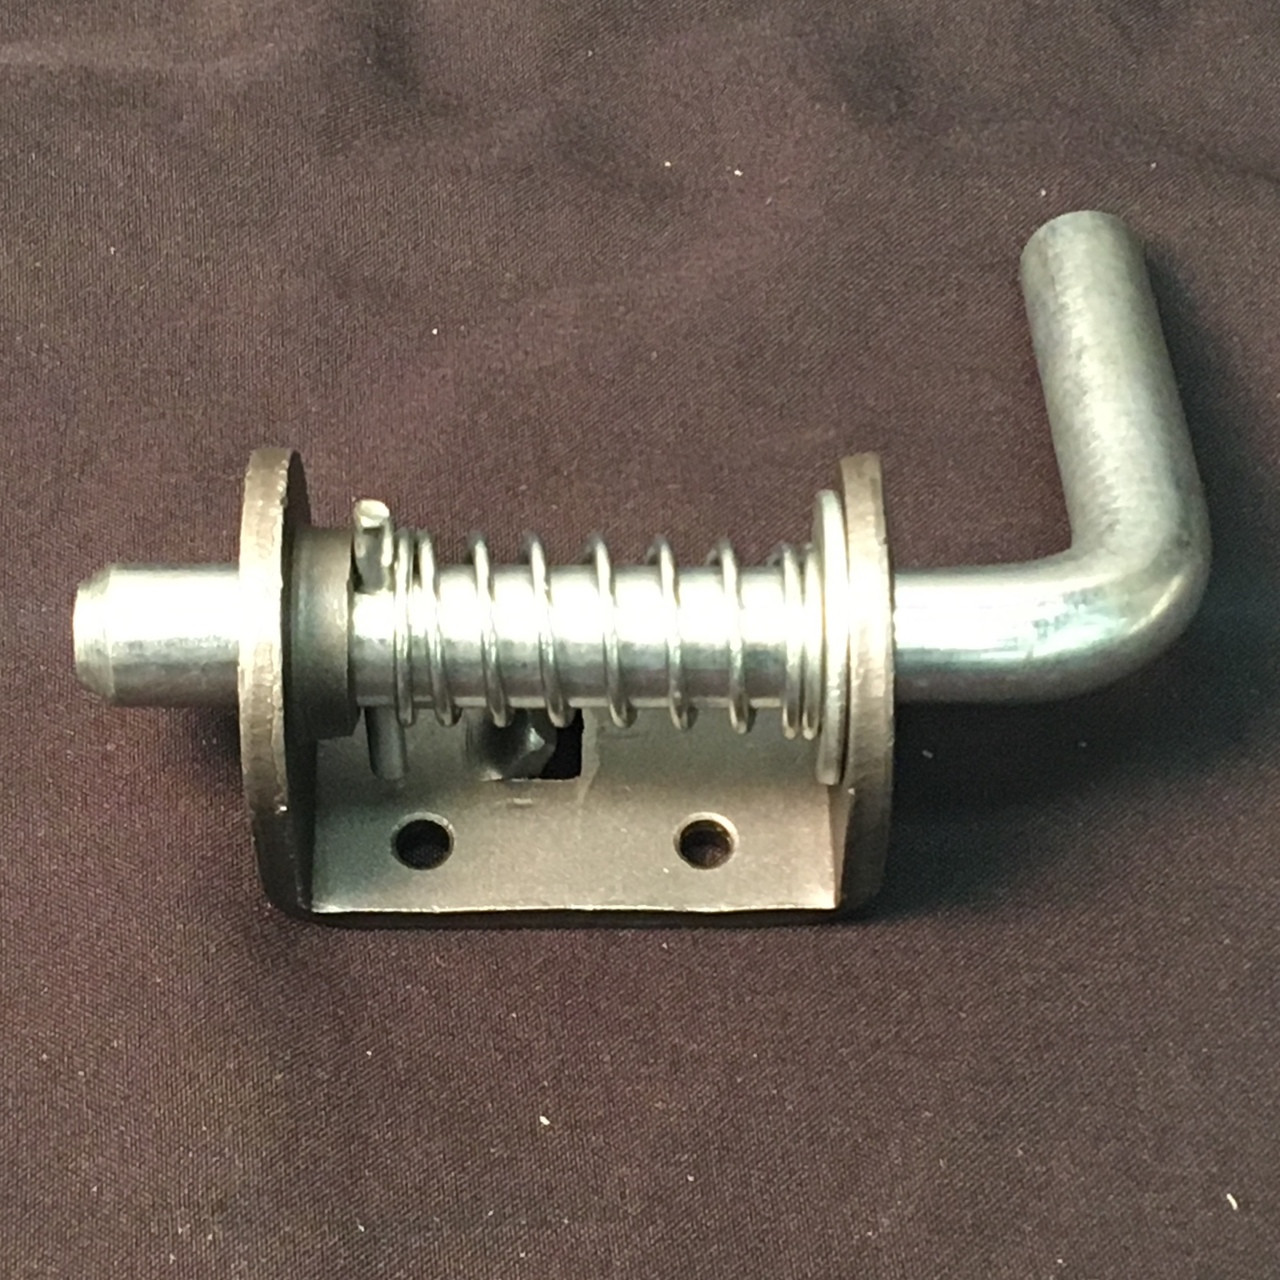 900-4904-90: BANDIT SPRING LOADED PIN 3/4"" FOR INFEED PAN SEE NOTES